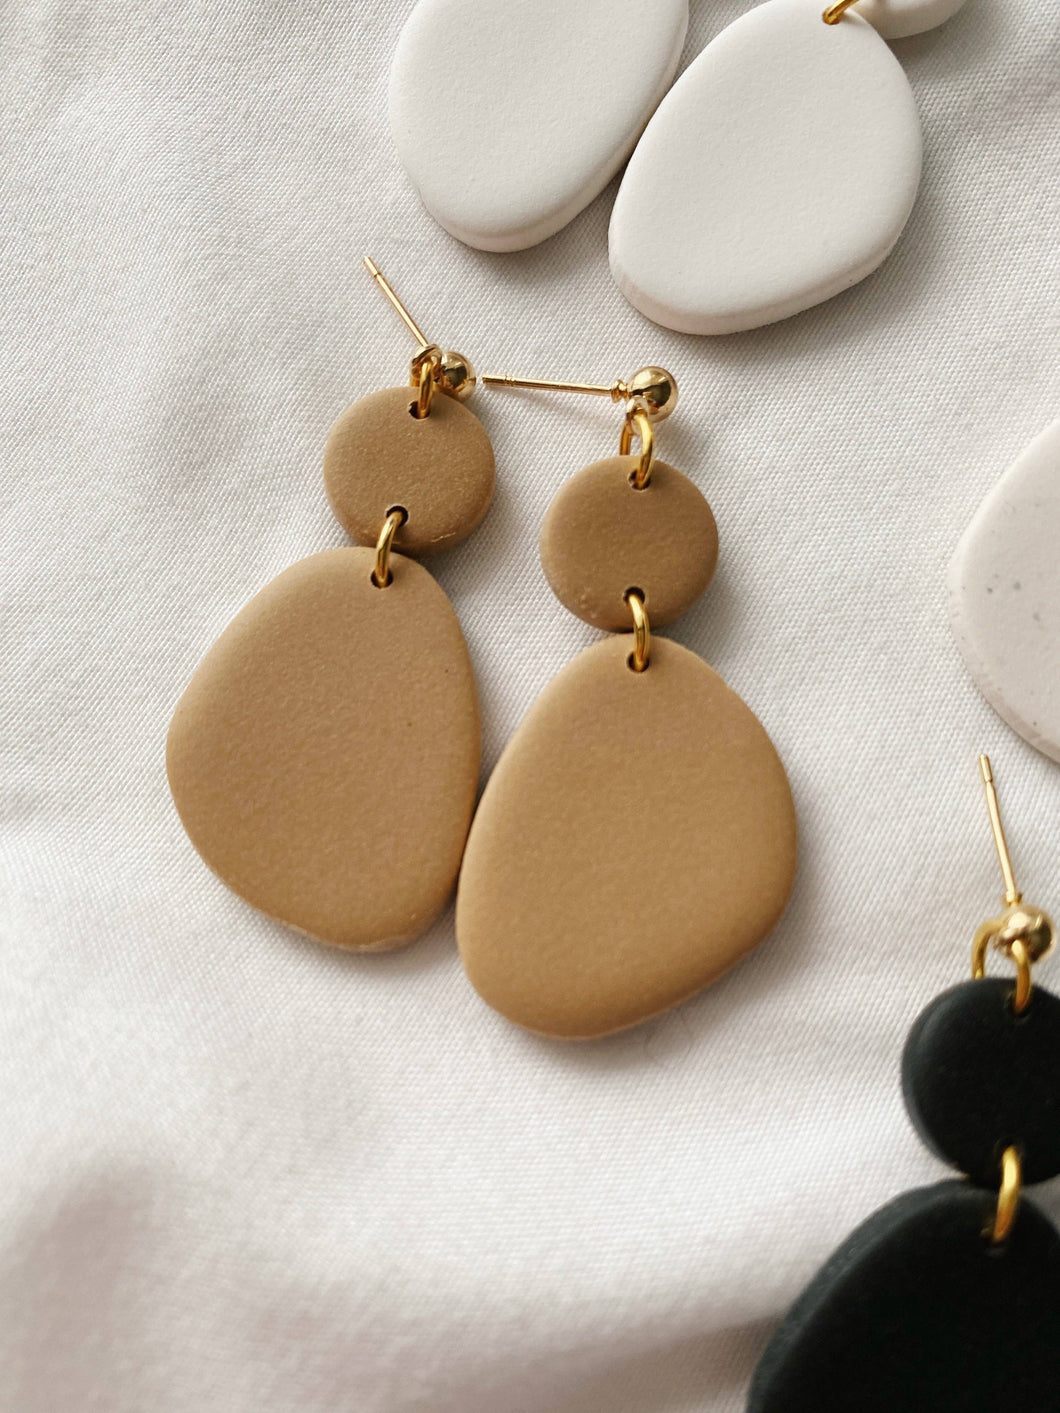 Selma | The Timeless Collection | Handmade Polymer Clay Earrings